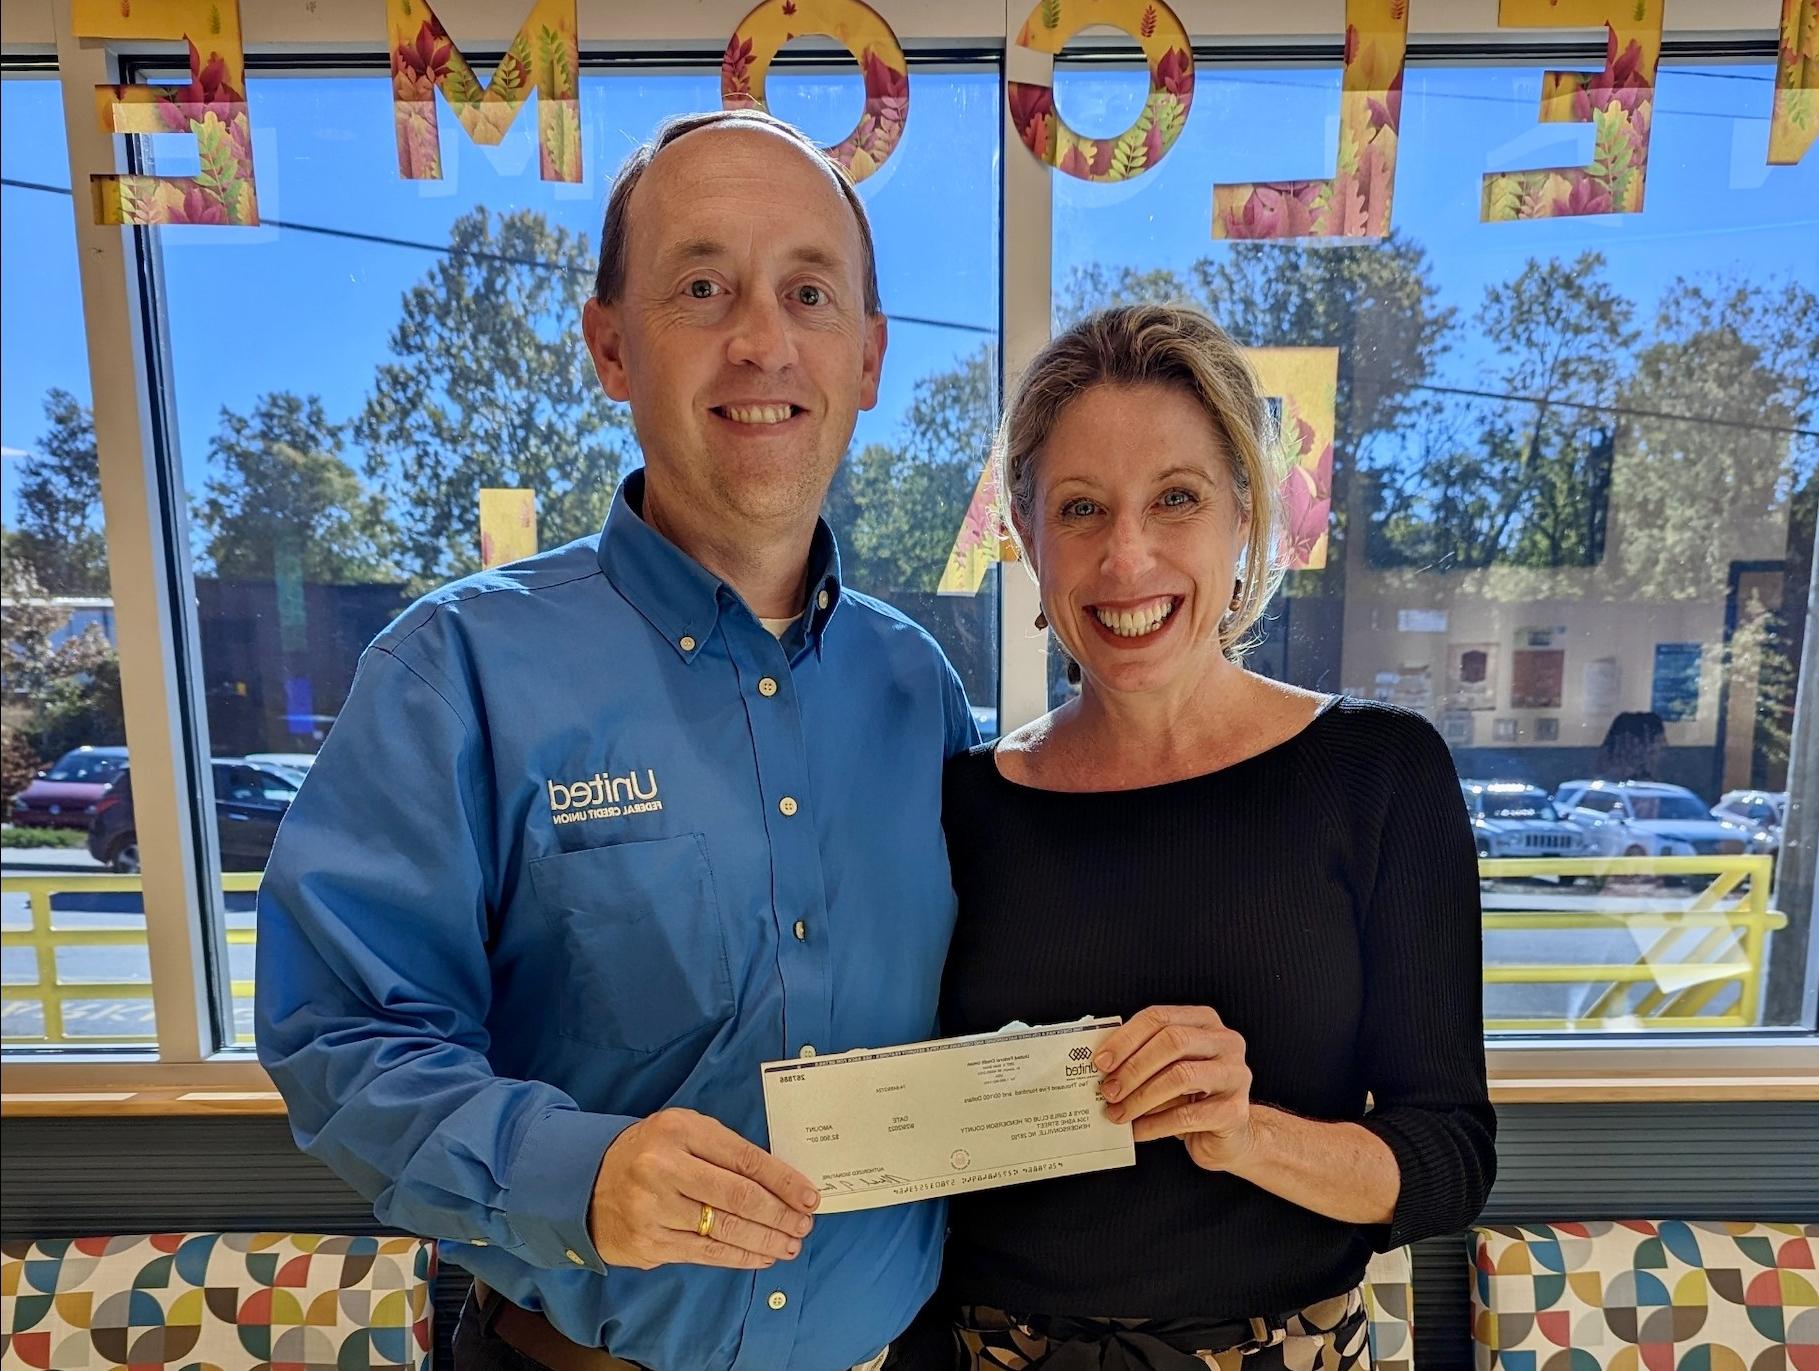 United Federal Credit Union’s Matt Sorrells (right) presents a fundraising check to the Boys & Girl Club of Henderson County’s Julia Hockenberry